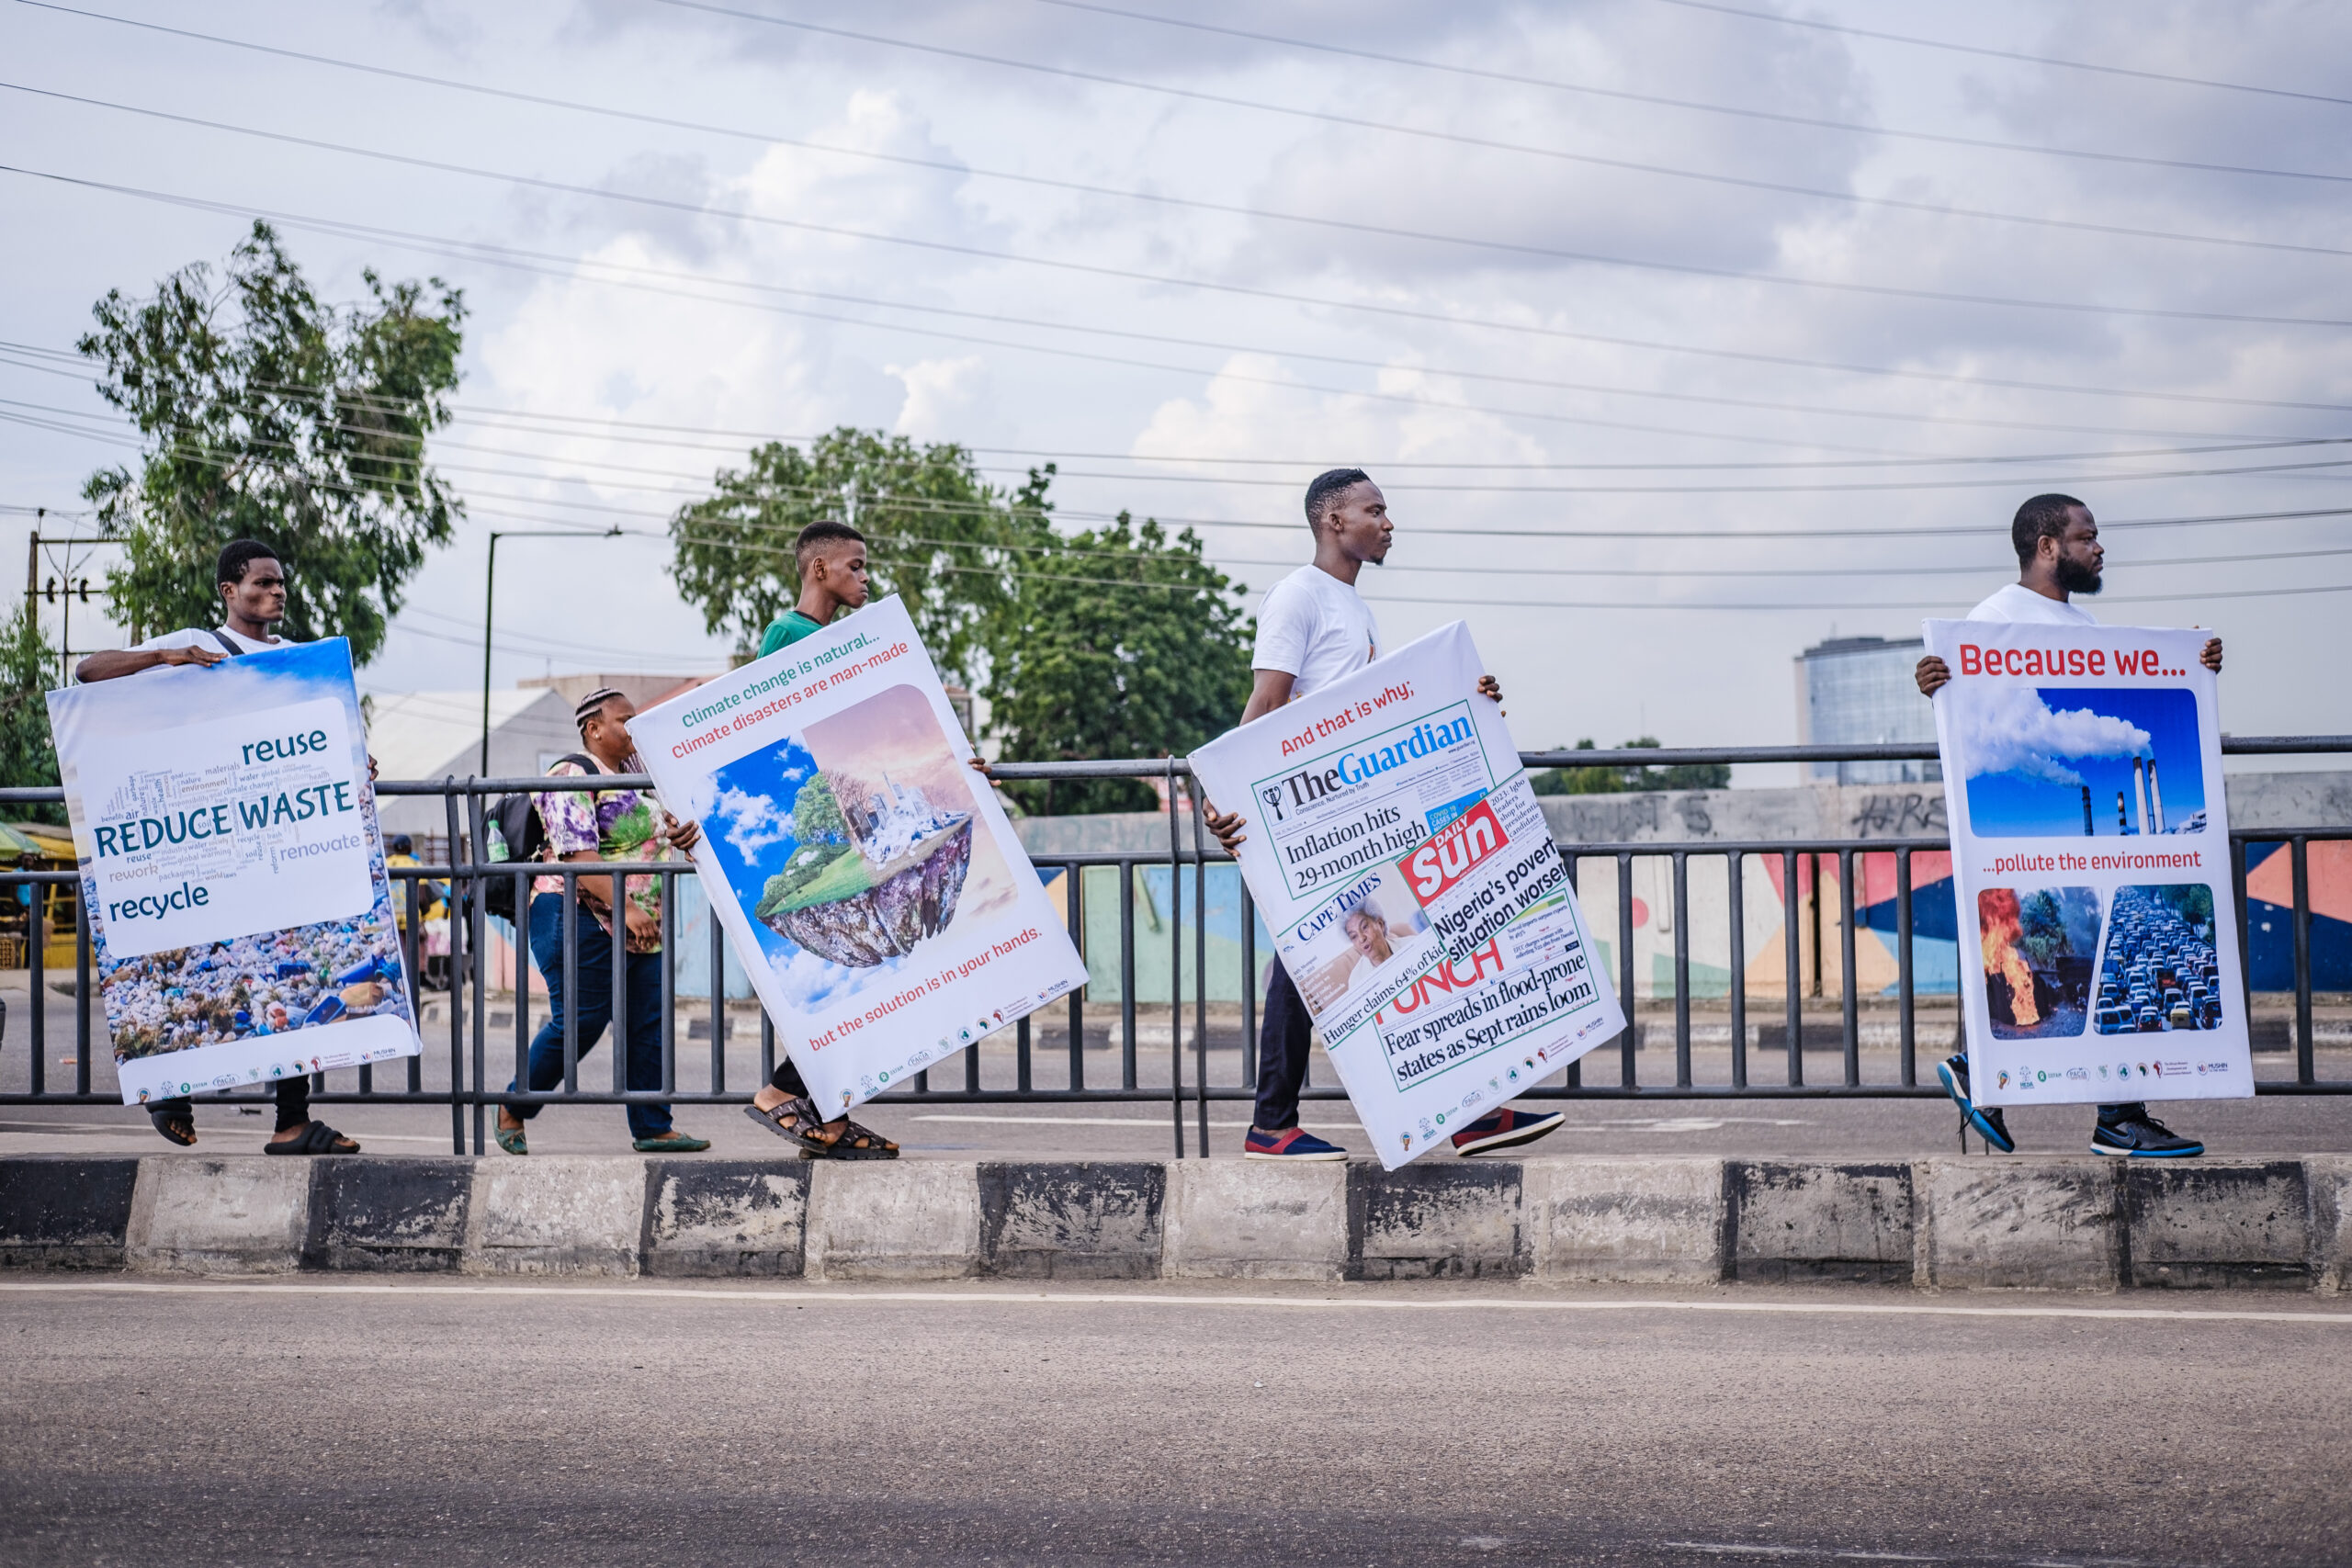 LAGOS, NG - OCTOBER 13, 2022: Volunteers carrying printed infographics by the roadside at the caravan climate change walk on October 13, 2022 in Maryland, Lagos State, Nigeria. CREDIT: Taiwo Aina for Oxfam Novib